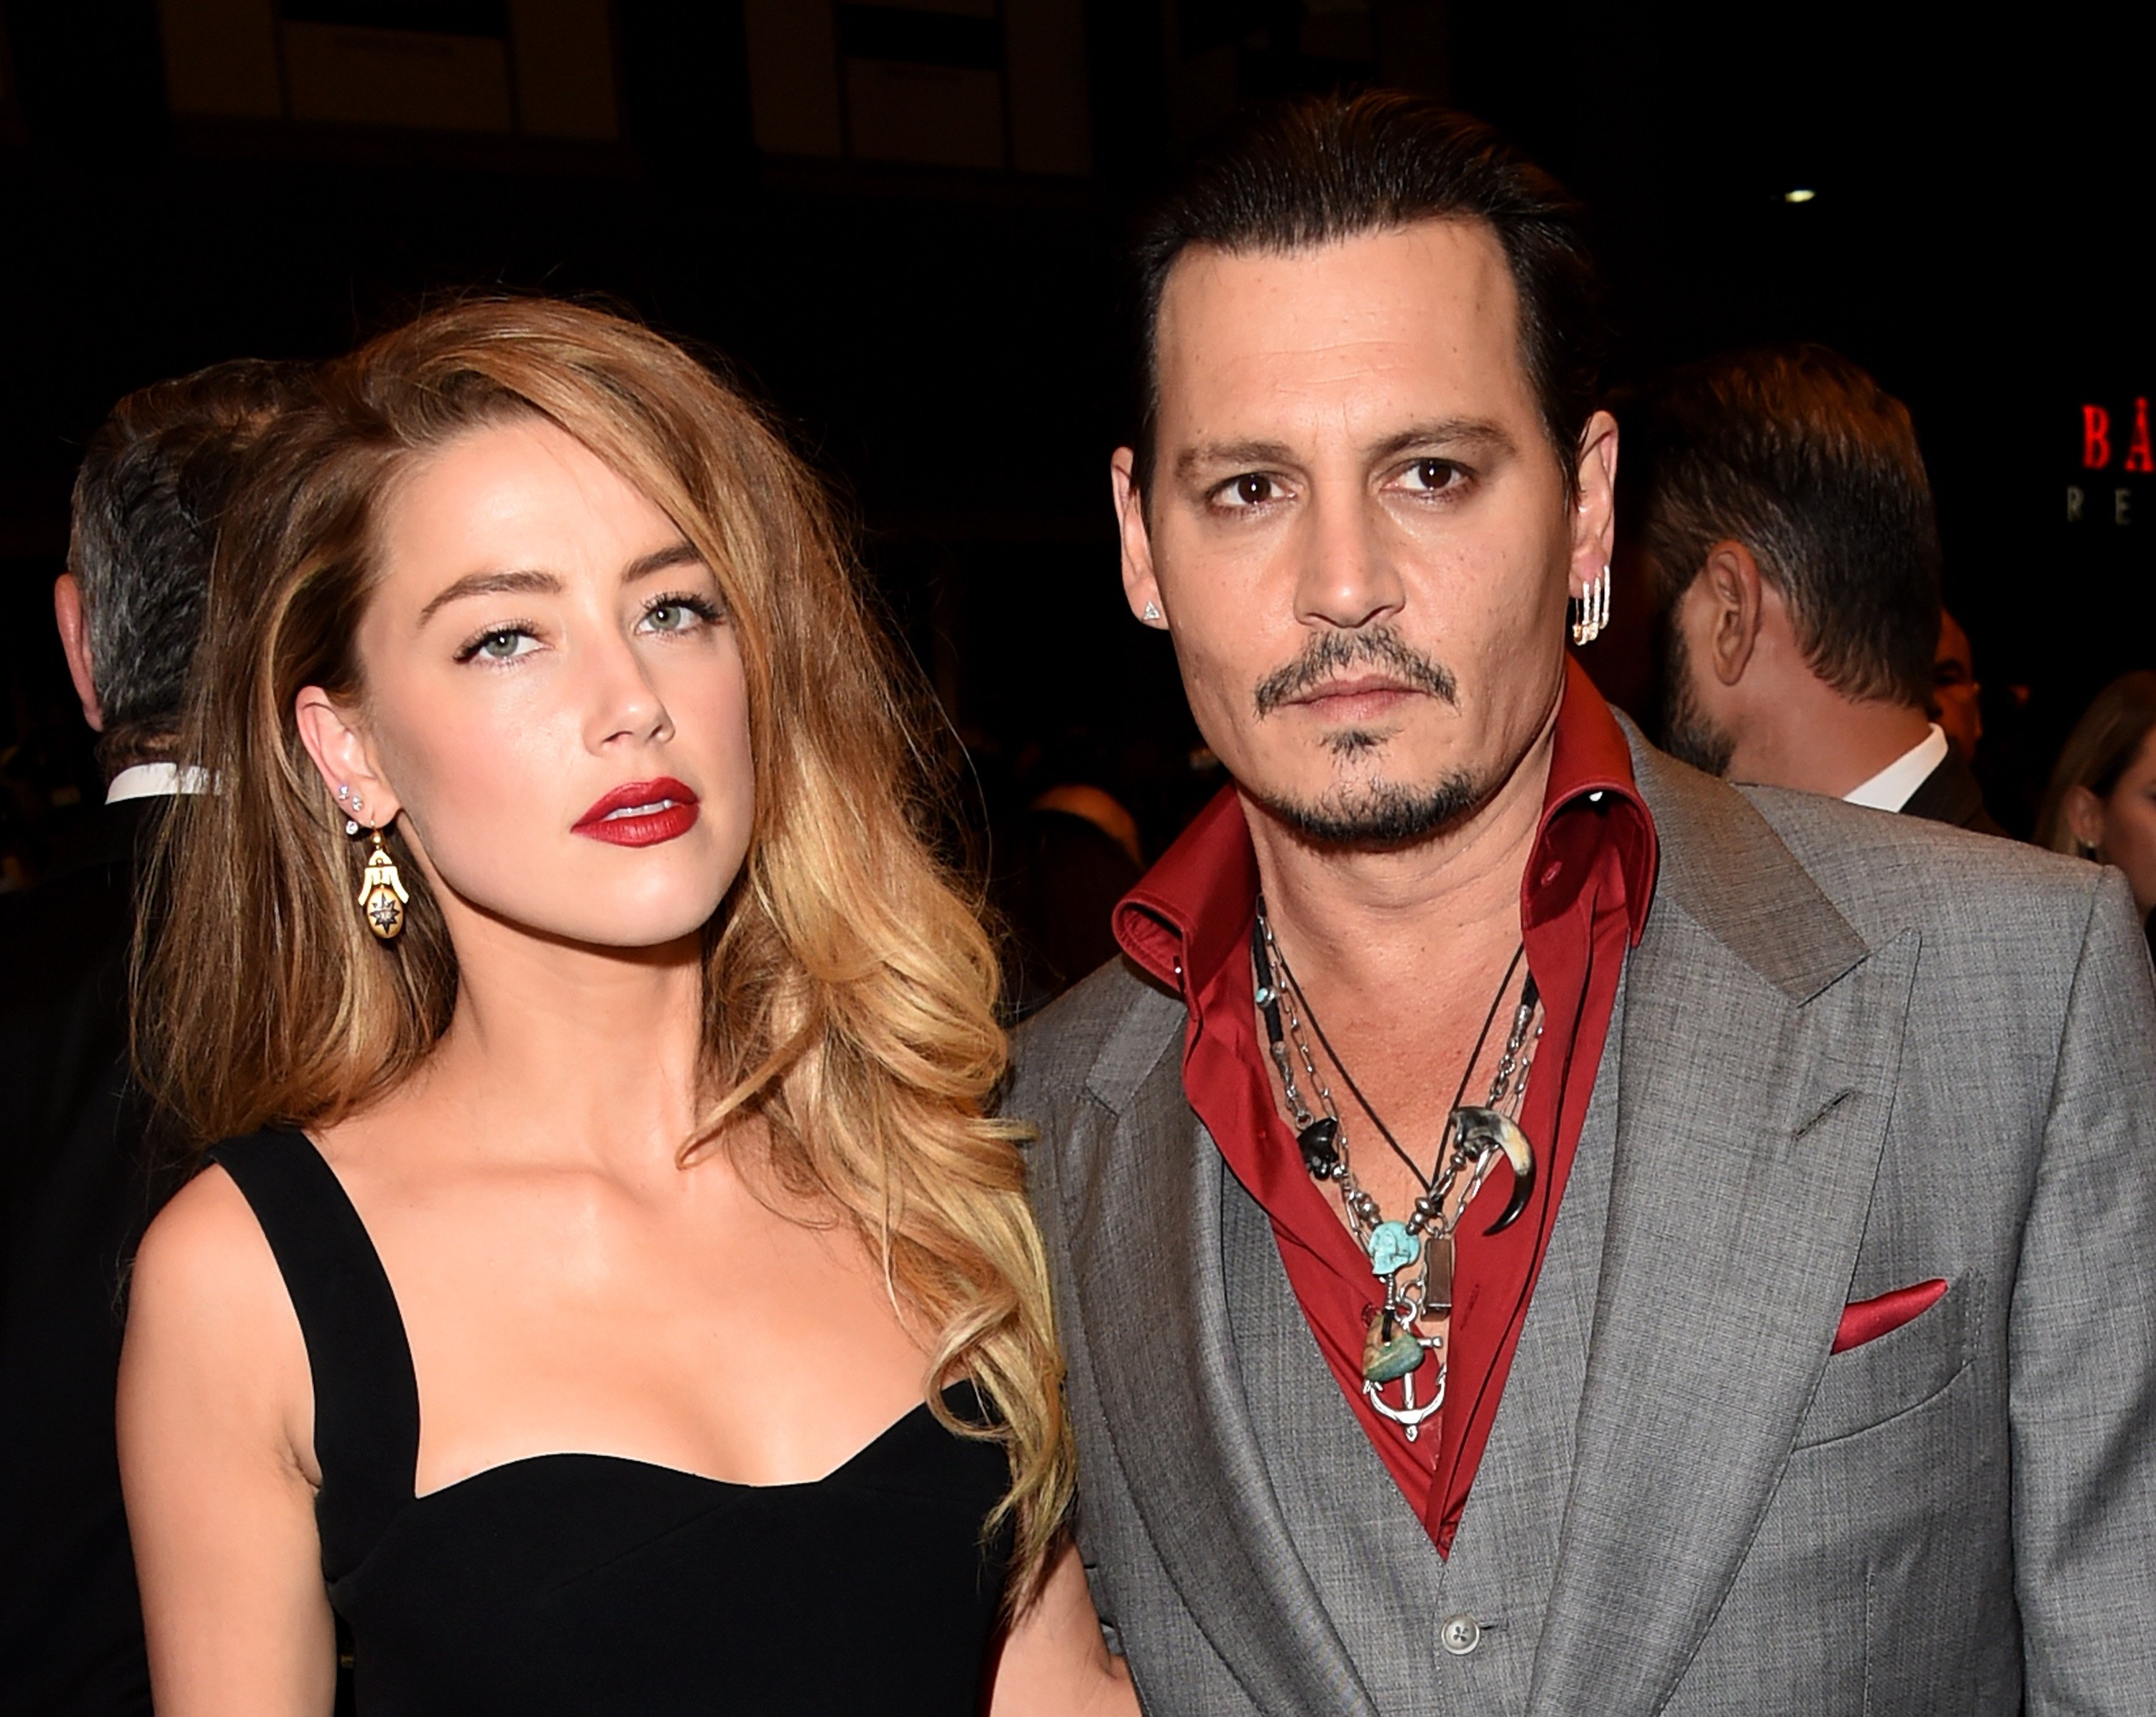 Amber Heard and Johnny Depp attend the "Black Mass" premiere during the 2015 Toronto International Film Festival at The Elgin on September 14, 2015, in Toronto, Canada. | Source: Getty Images